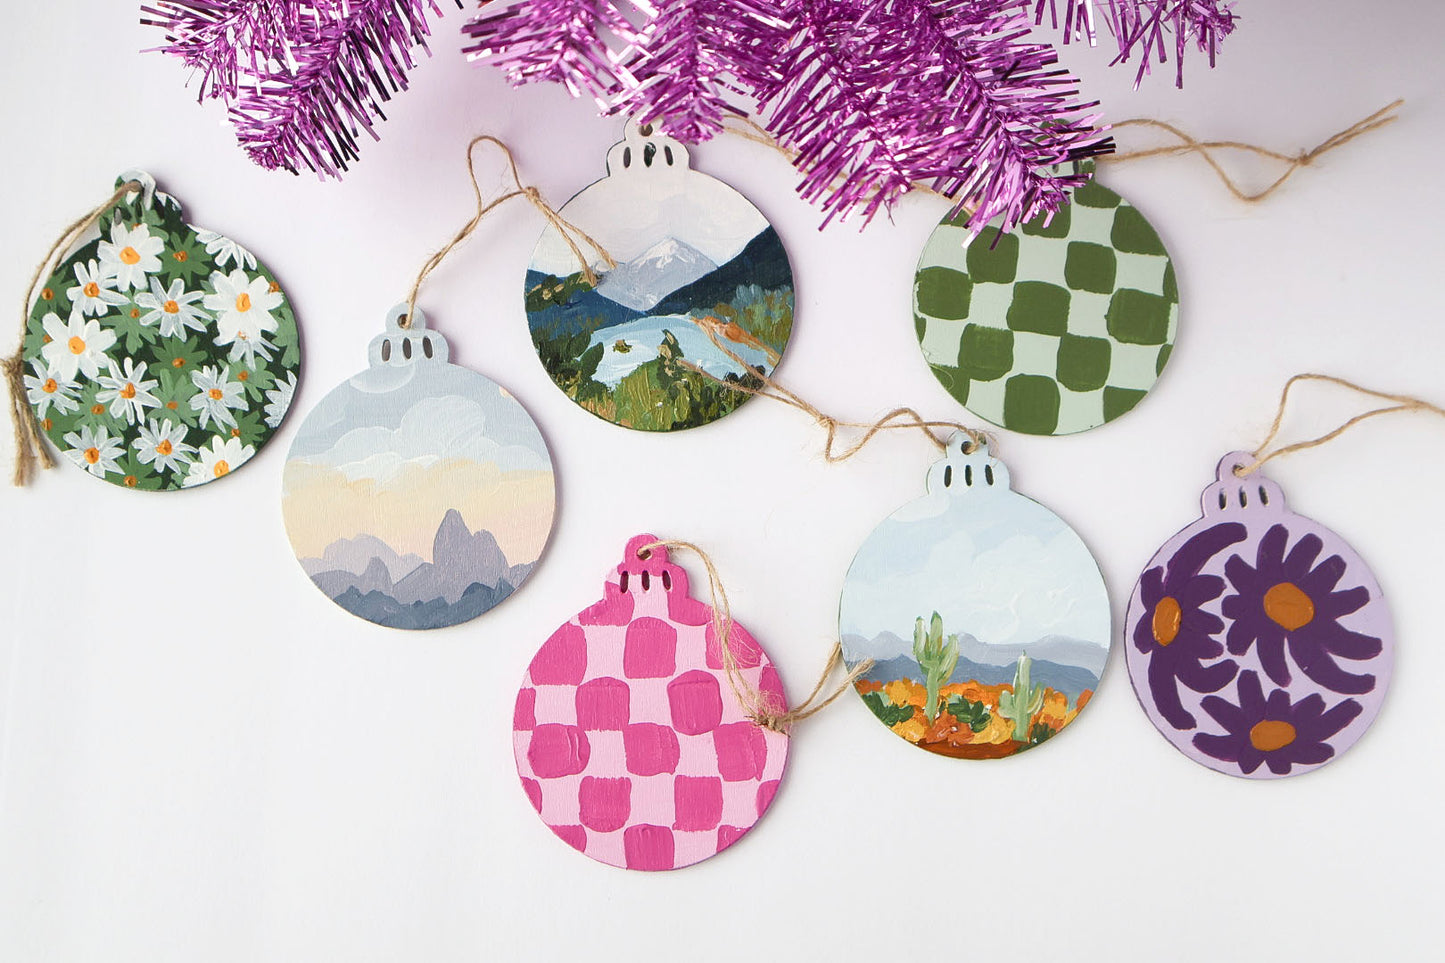 Mountain Sunset Hand Painted Ornament